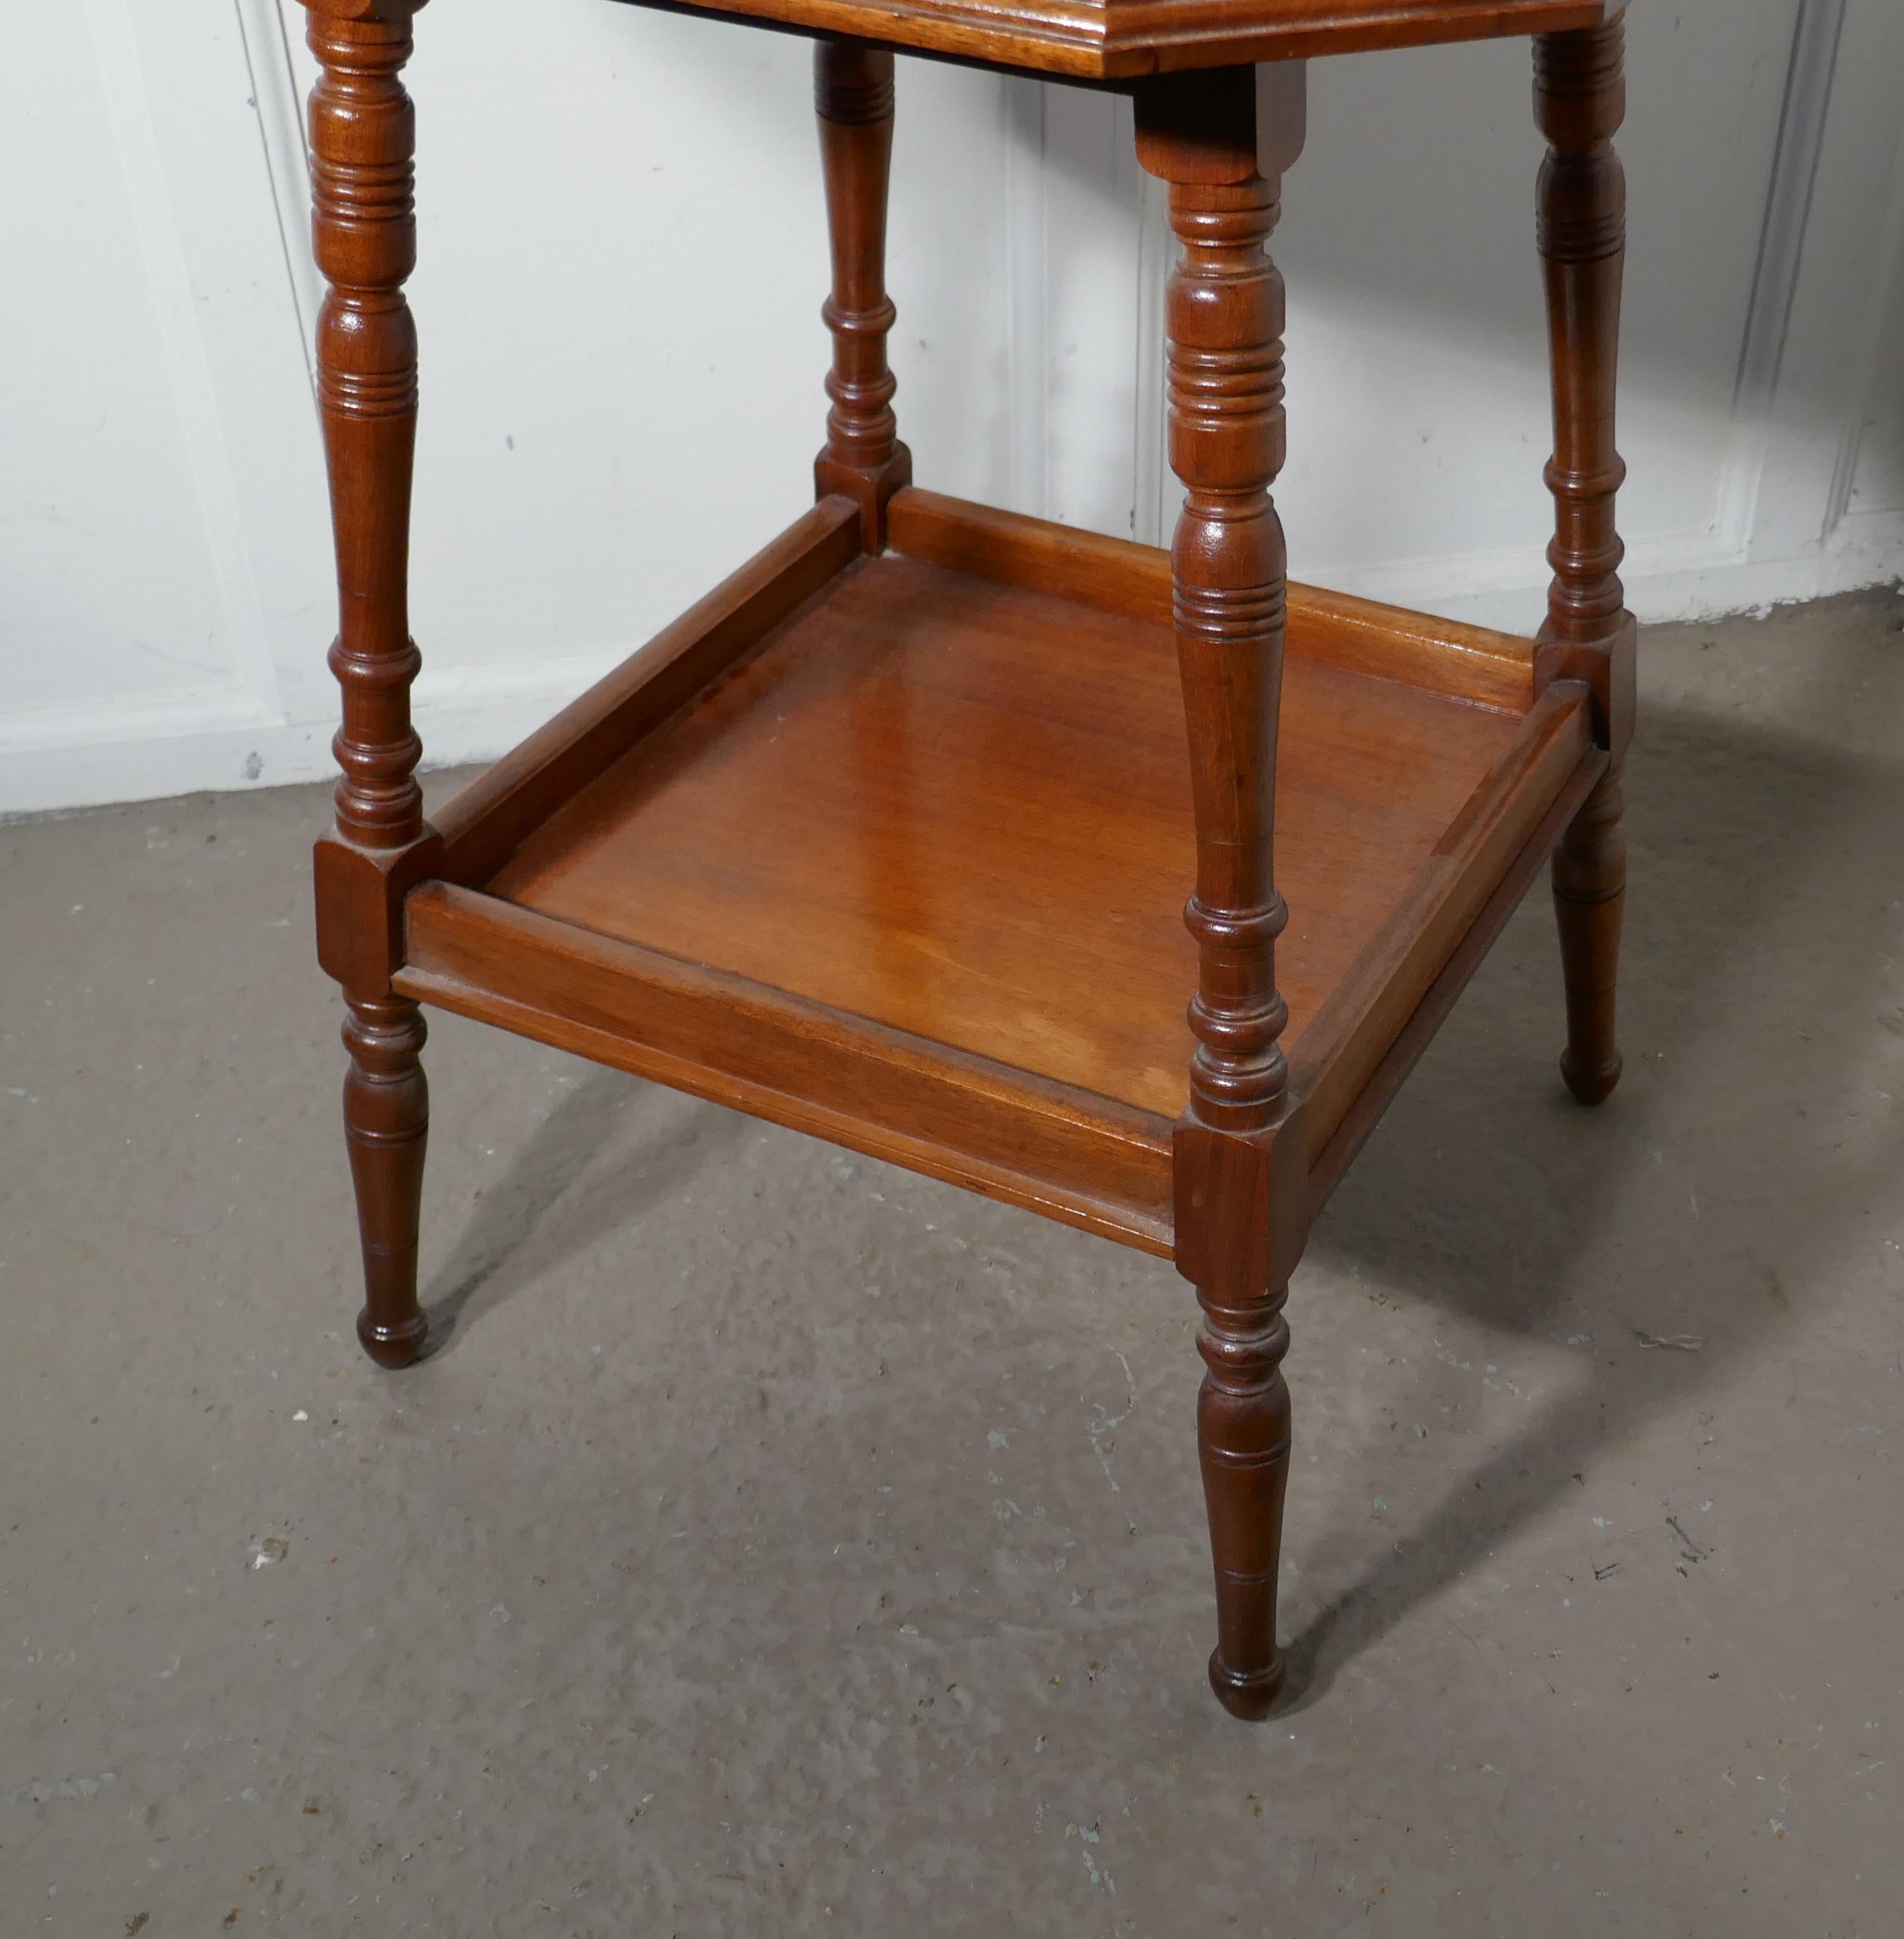 Early 20th Century Edwardian Blonde Mahogany Étagère or Occasional Table